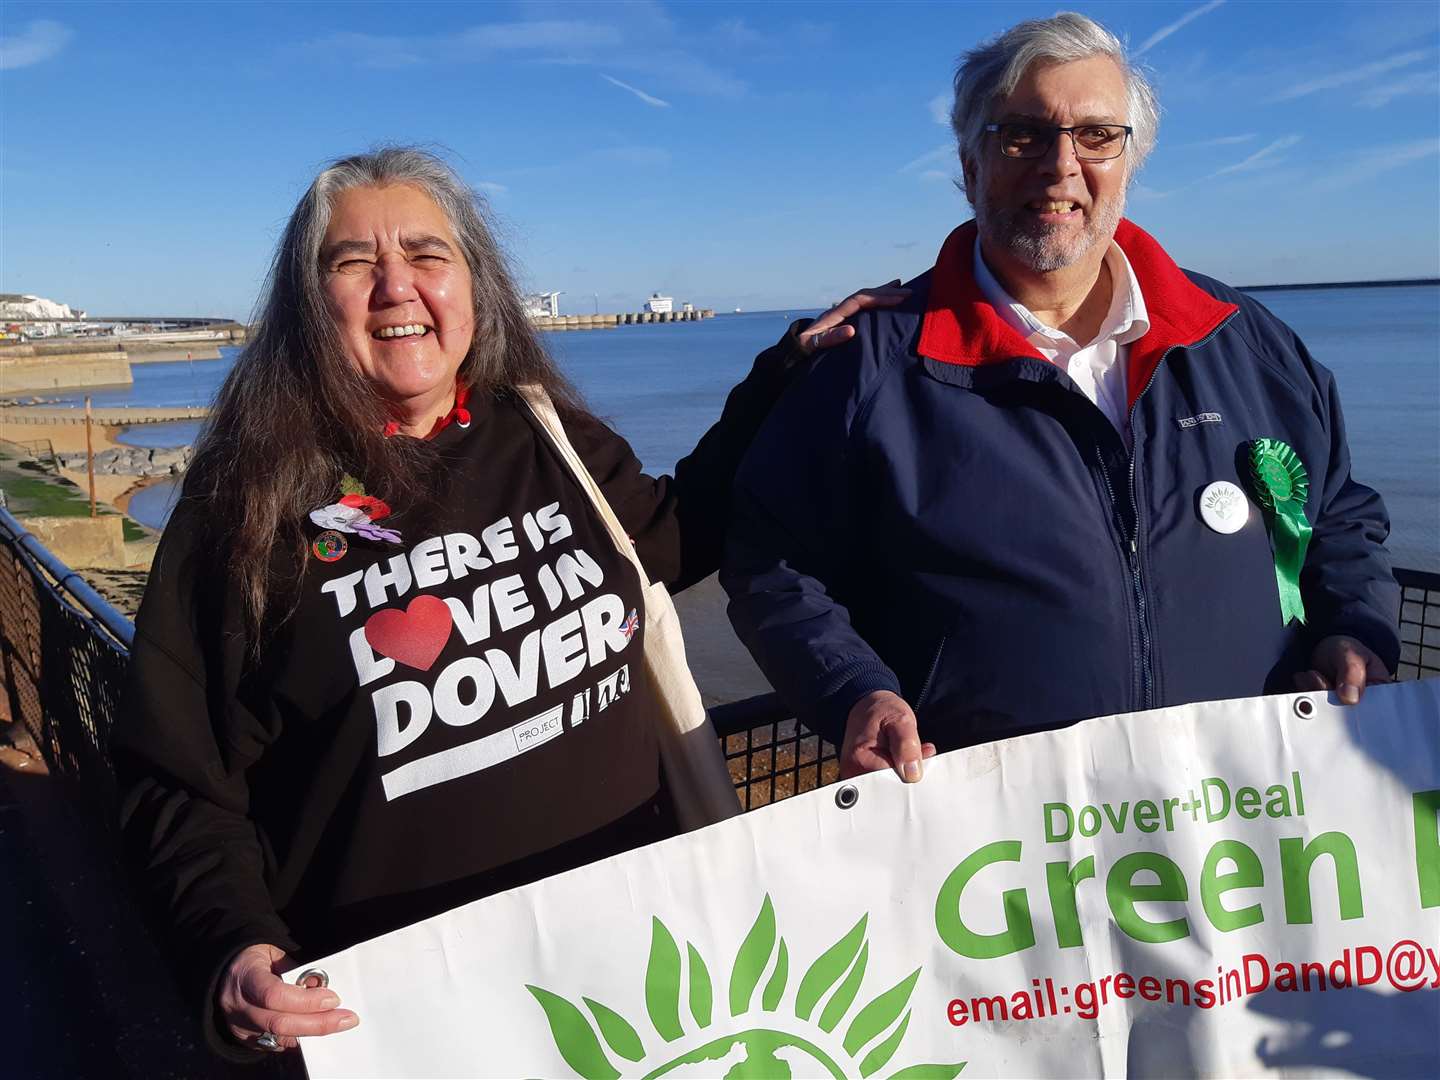 Cllr Eddy with Dover Green Party member Beccy Sawbridge during today's annoucement